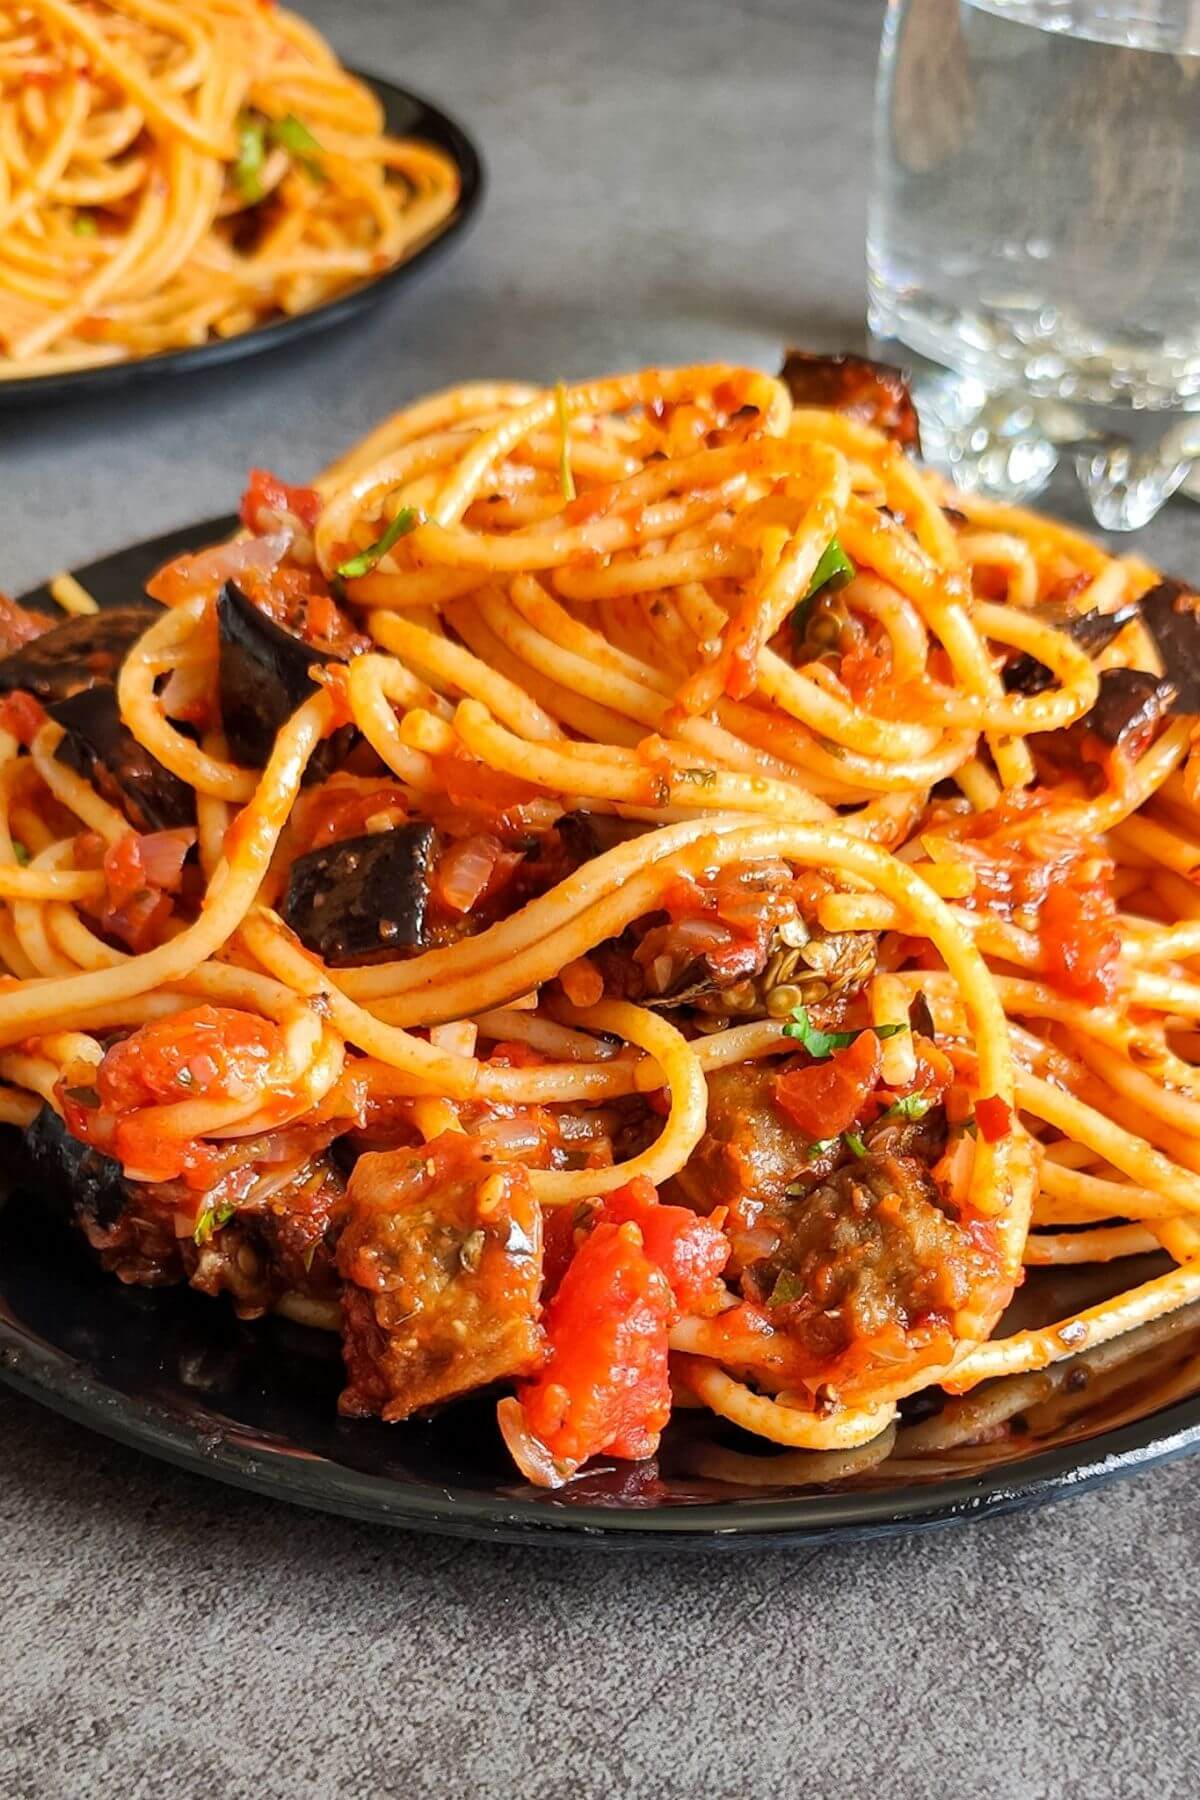 A plate of pasta with roasted eggplant mixed in.